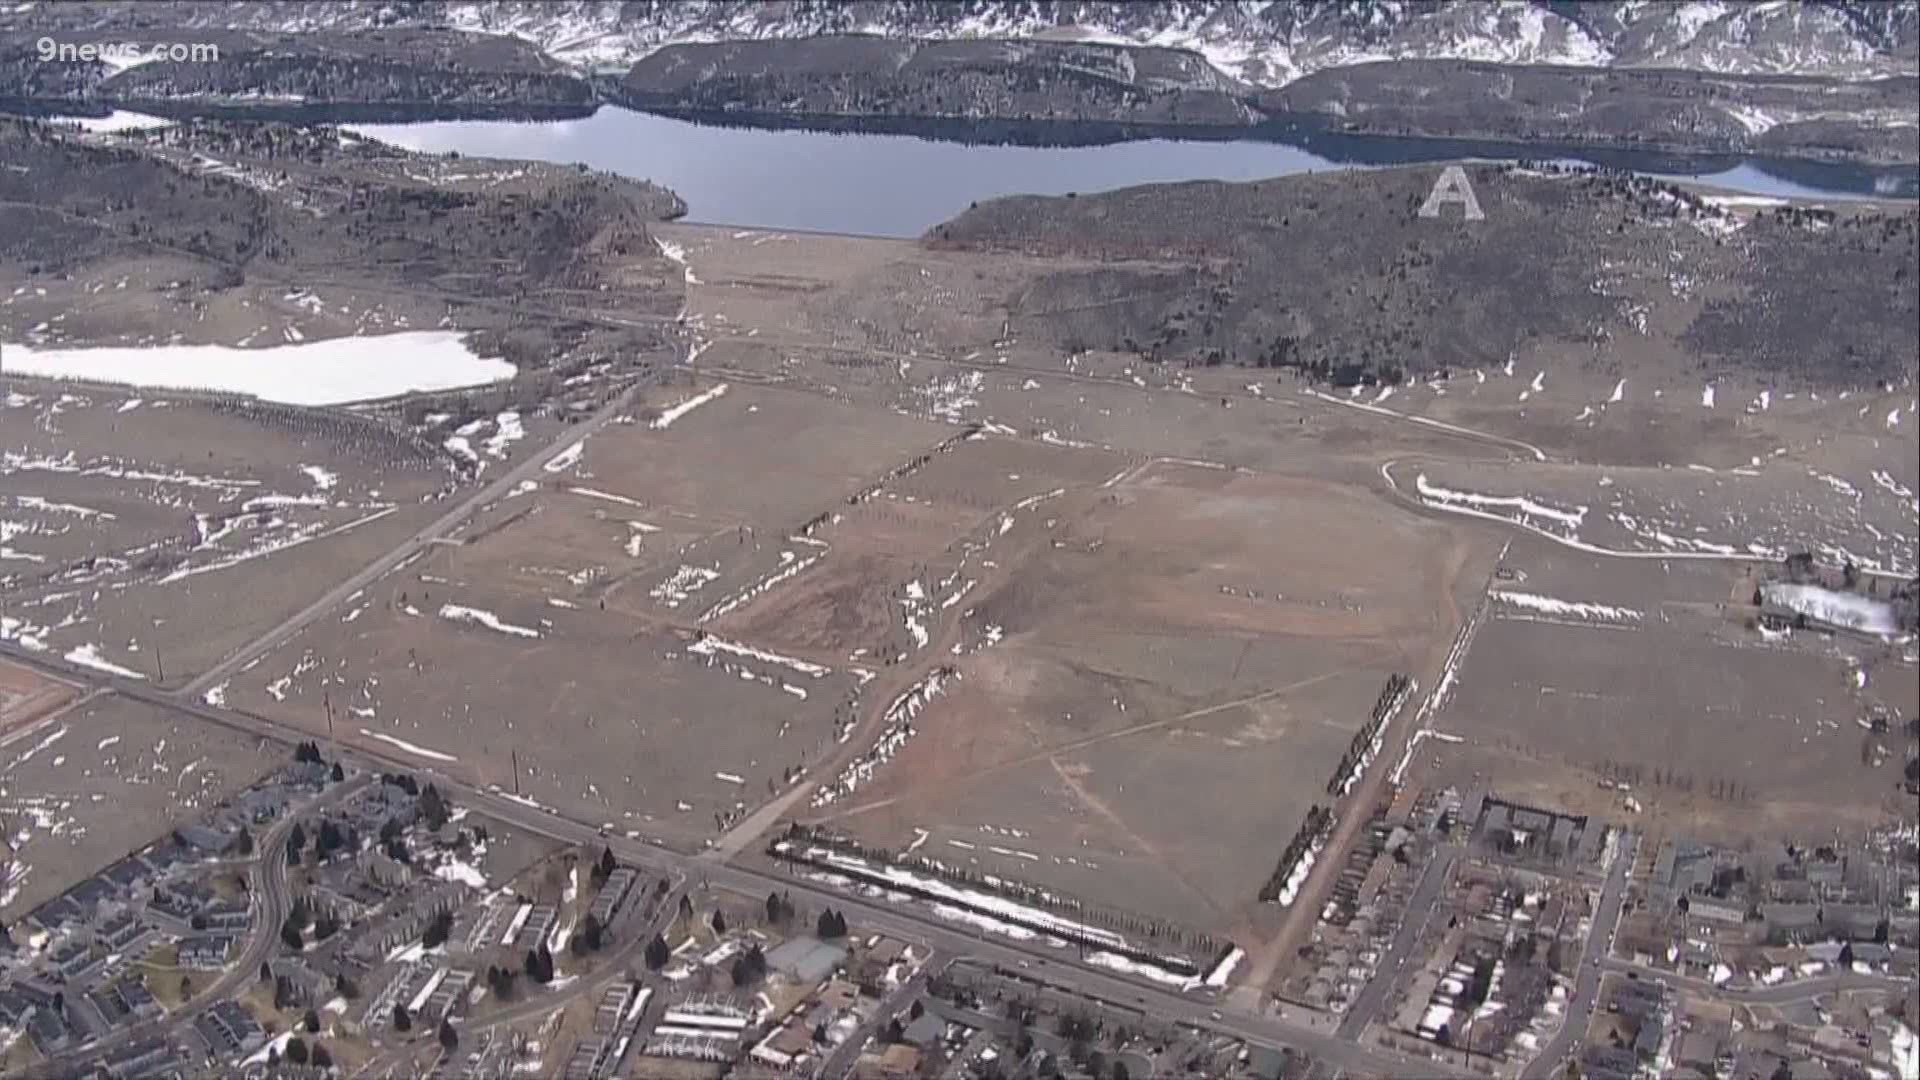 The city of Fort Collins took a step forward tonight to convert the former Hughes Stadium site into an open space.